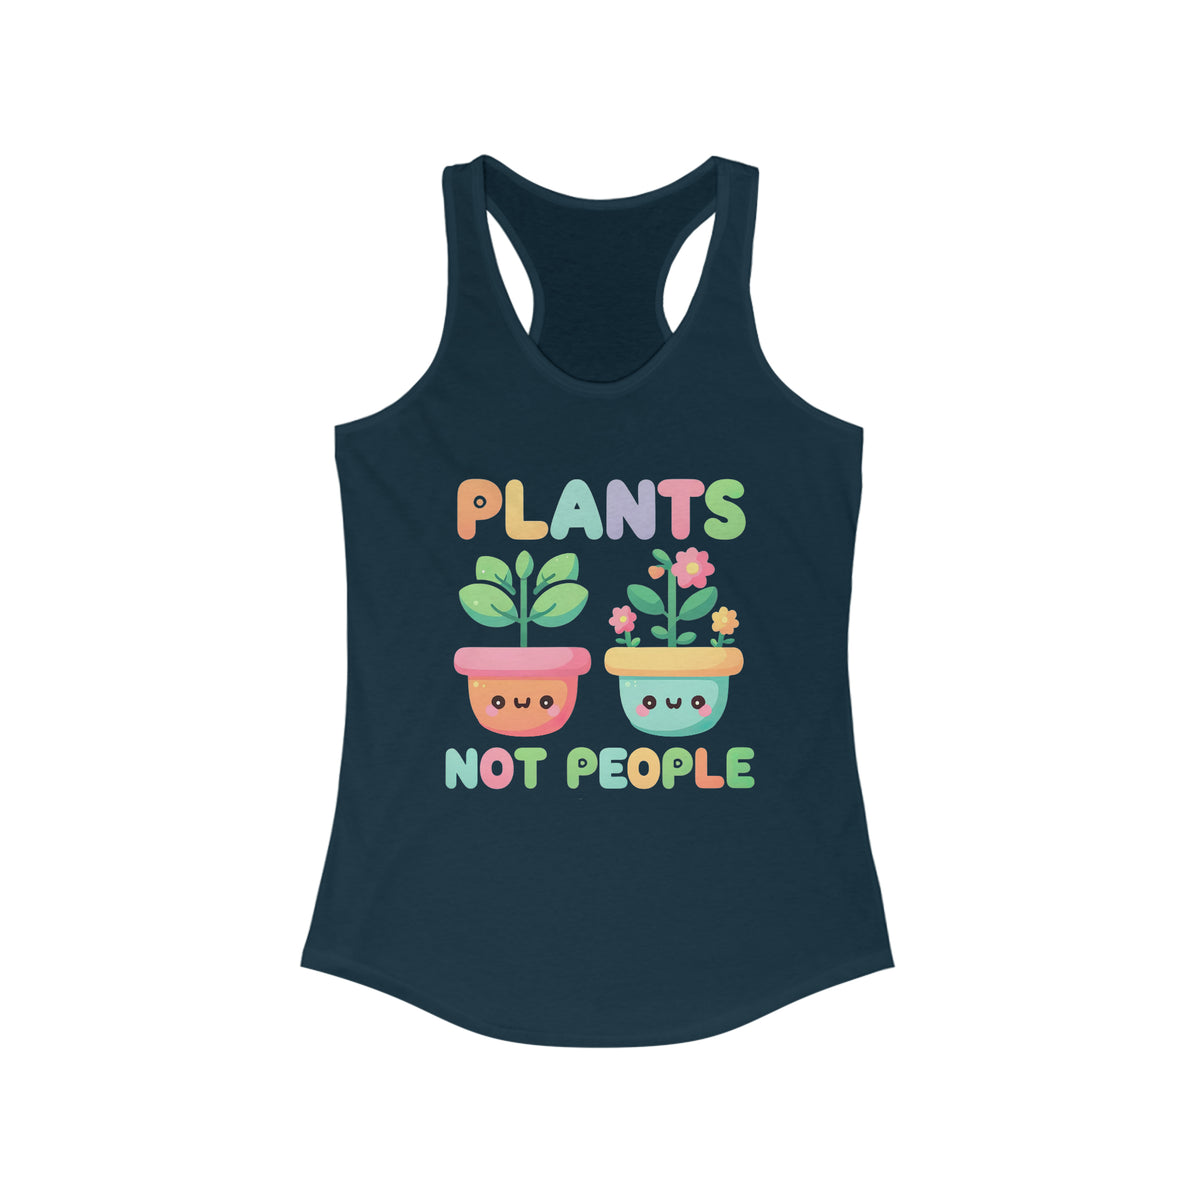 Plants Not People Plant Lover Shirt | Introvert Shirt | Funny Kawaii Plant Lover Gift  | Women's Slim Fit Racerback Tank